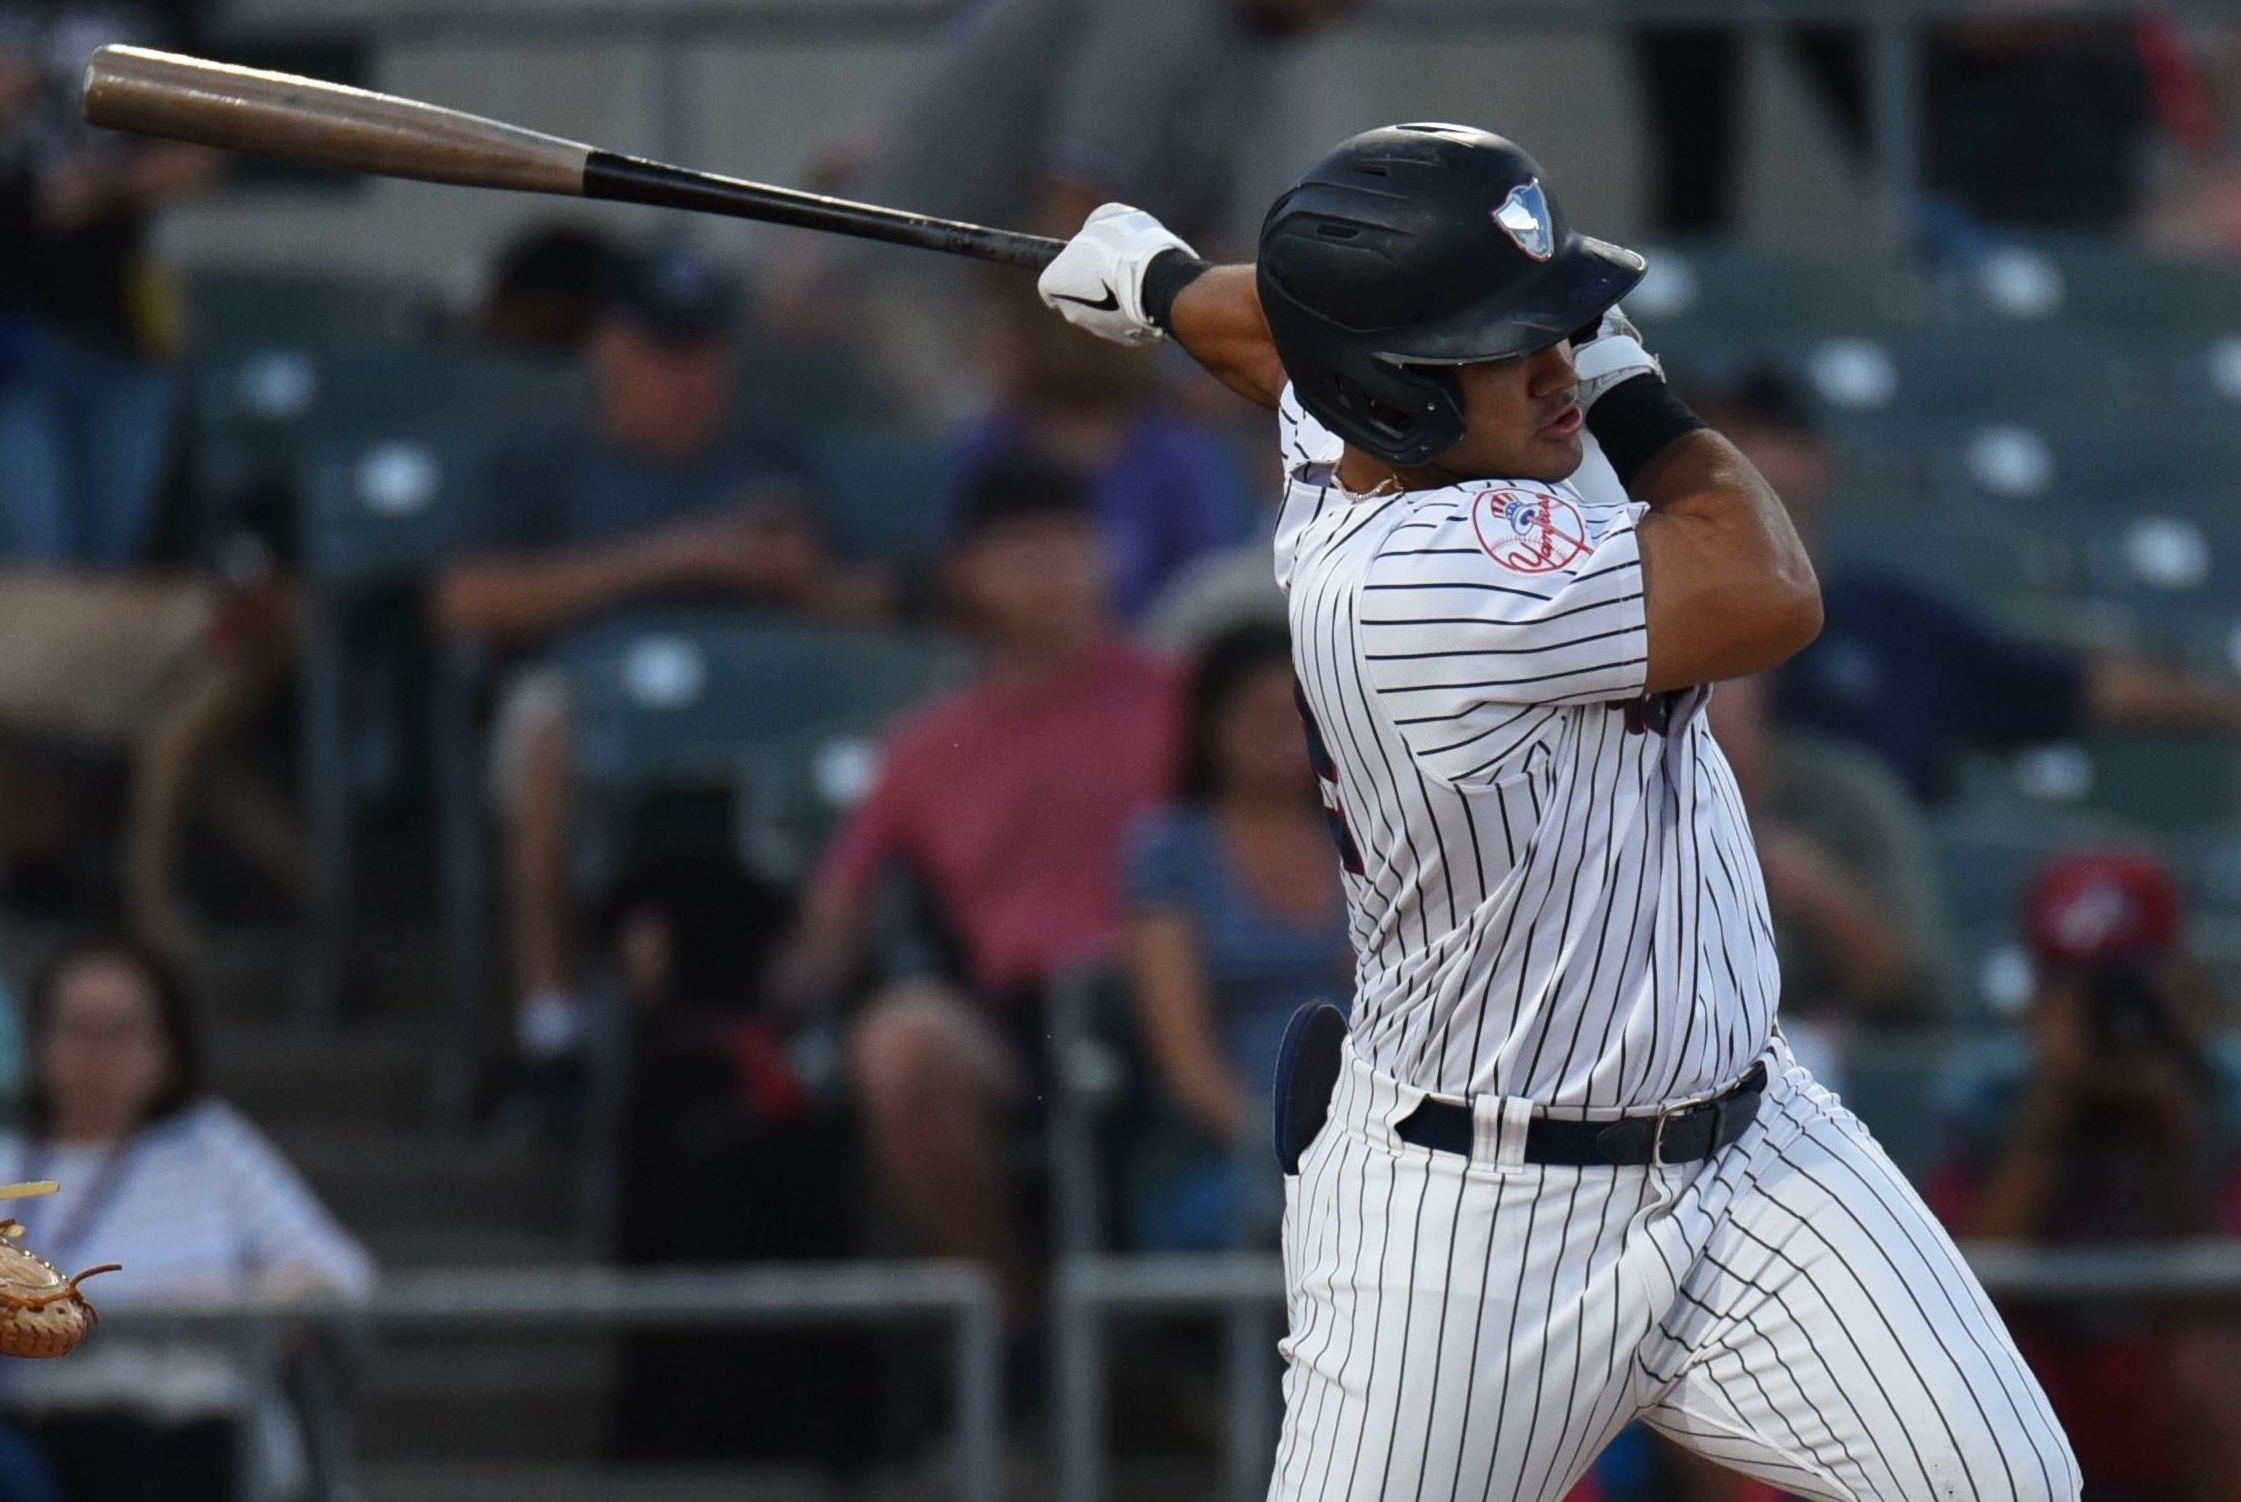 New York Yankees top prospect Jasson Dominguez hits first pro home